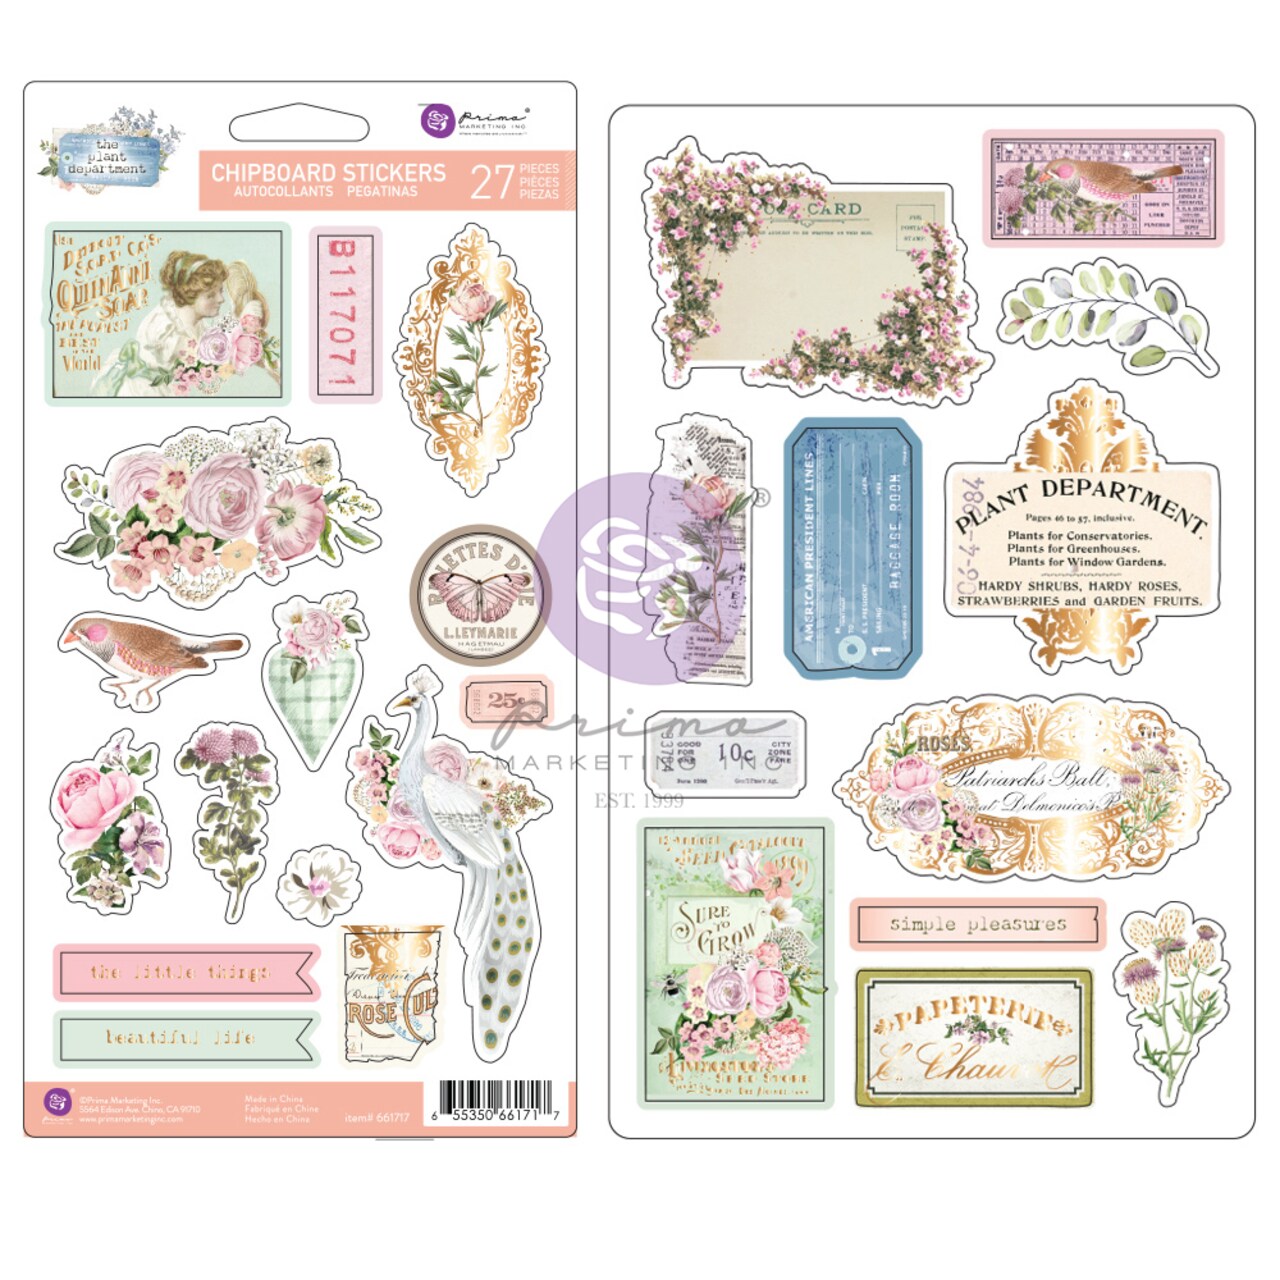 Prima Marketing The Plant Department Collection Chipboard Stickers - 27 pcs  w/ foil details / chipboard stickers for Scrapbooking, Journaling Supplies,  Planners, Kid DIY Art Crafts, Bullet Journal